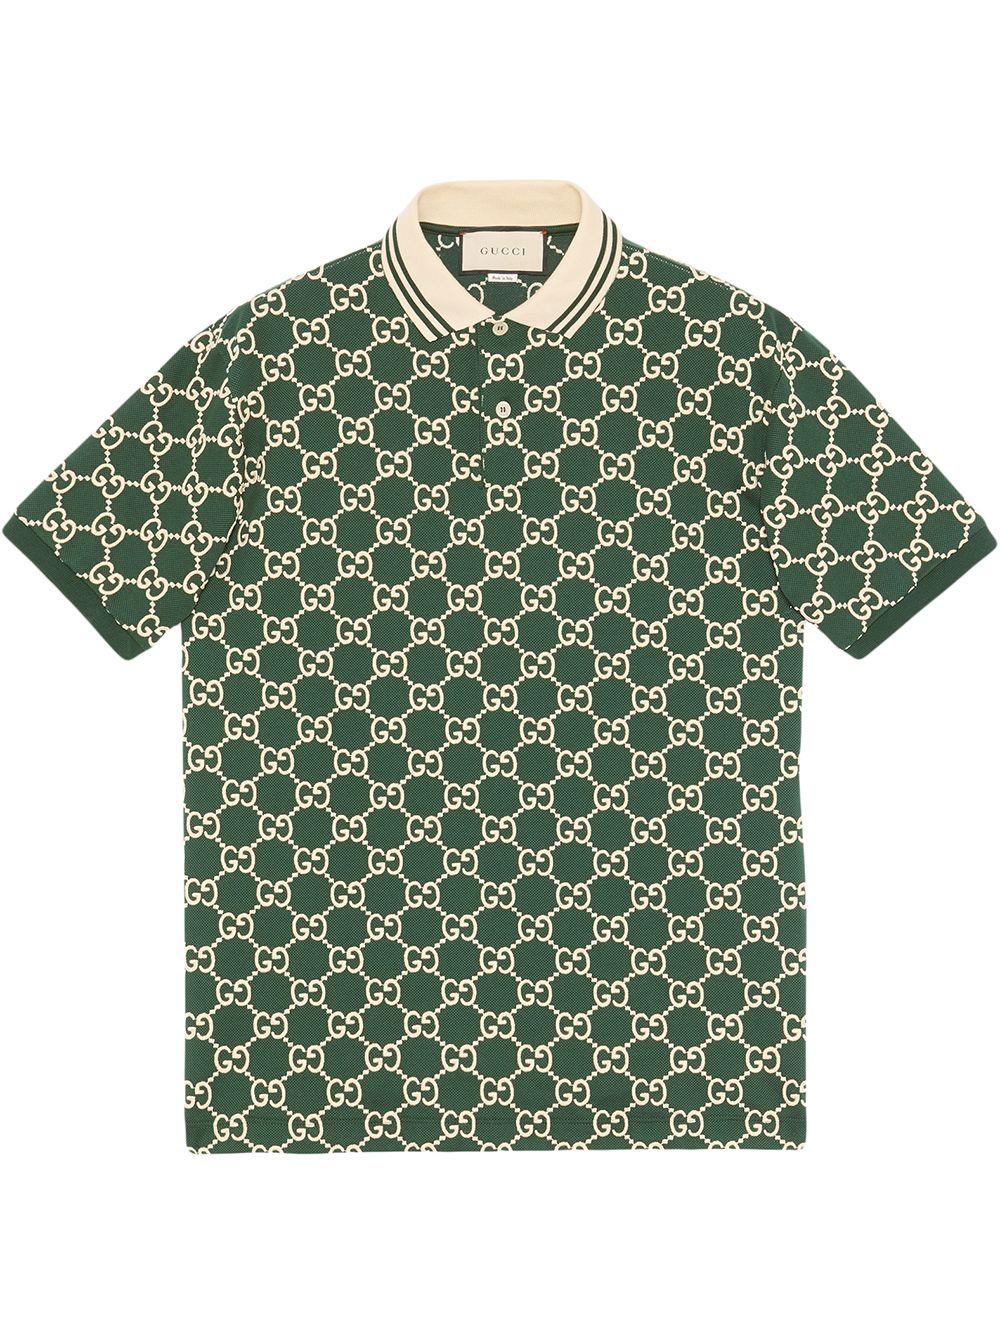 Gucci GG Stretch Polo in Green for Men - Lyst